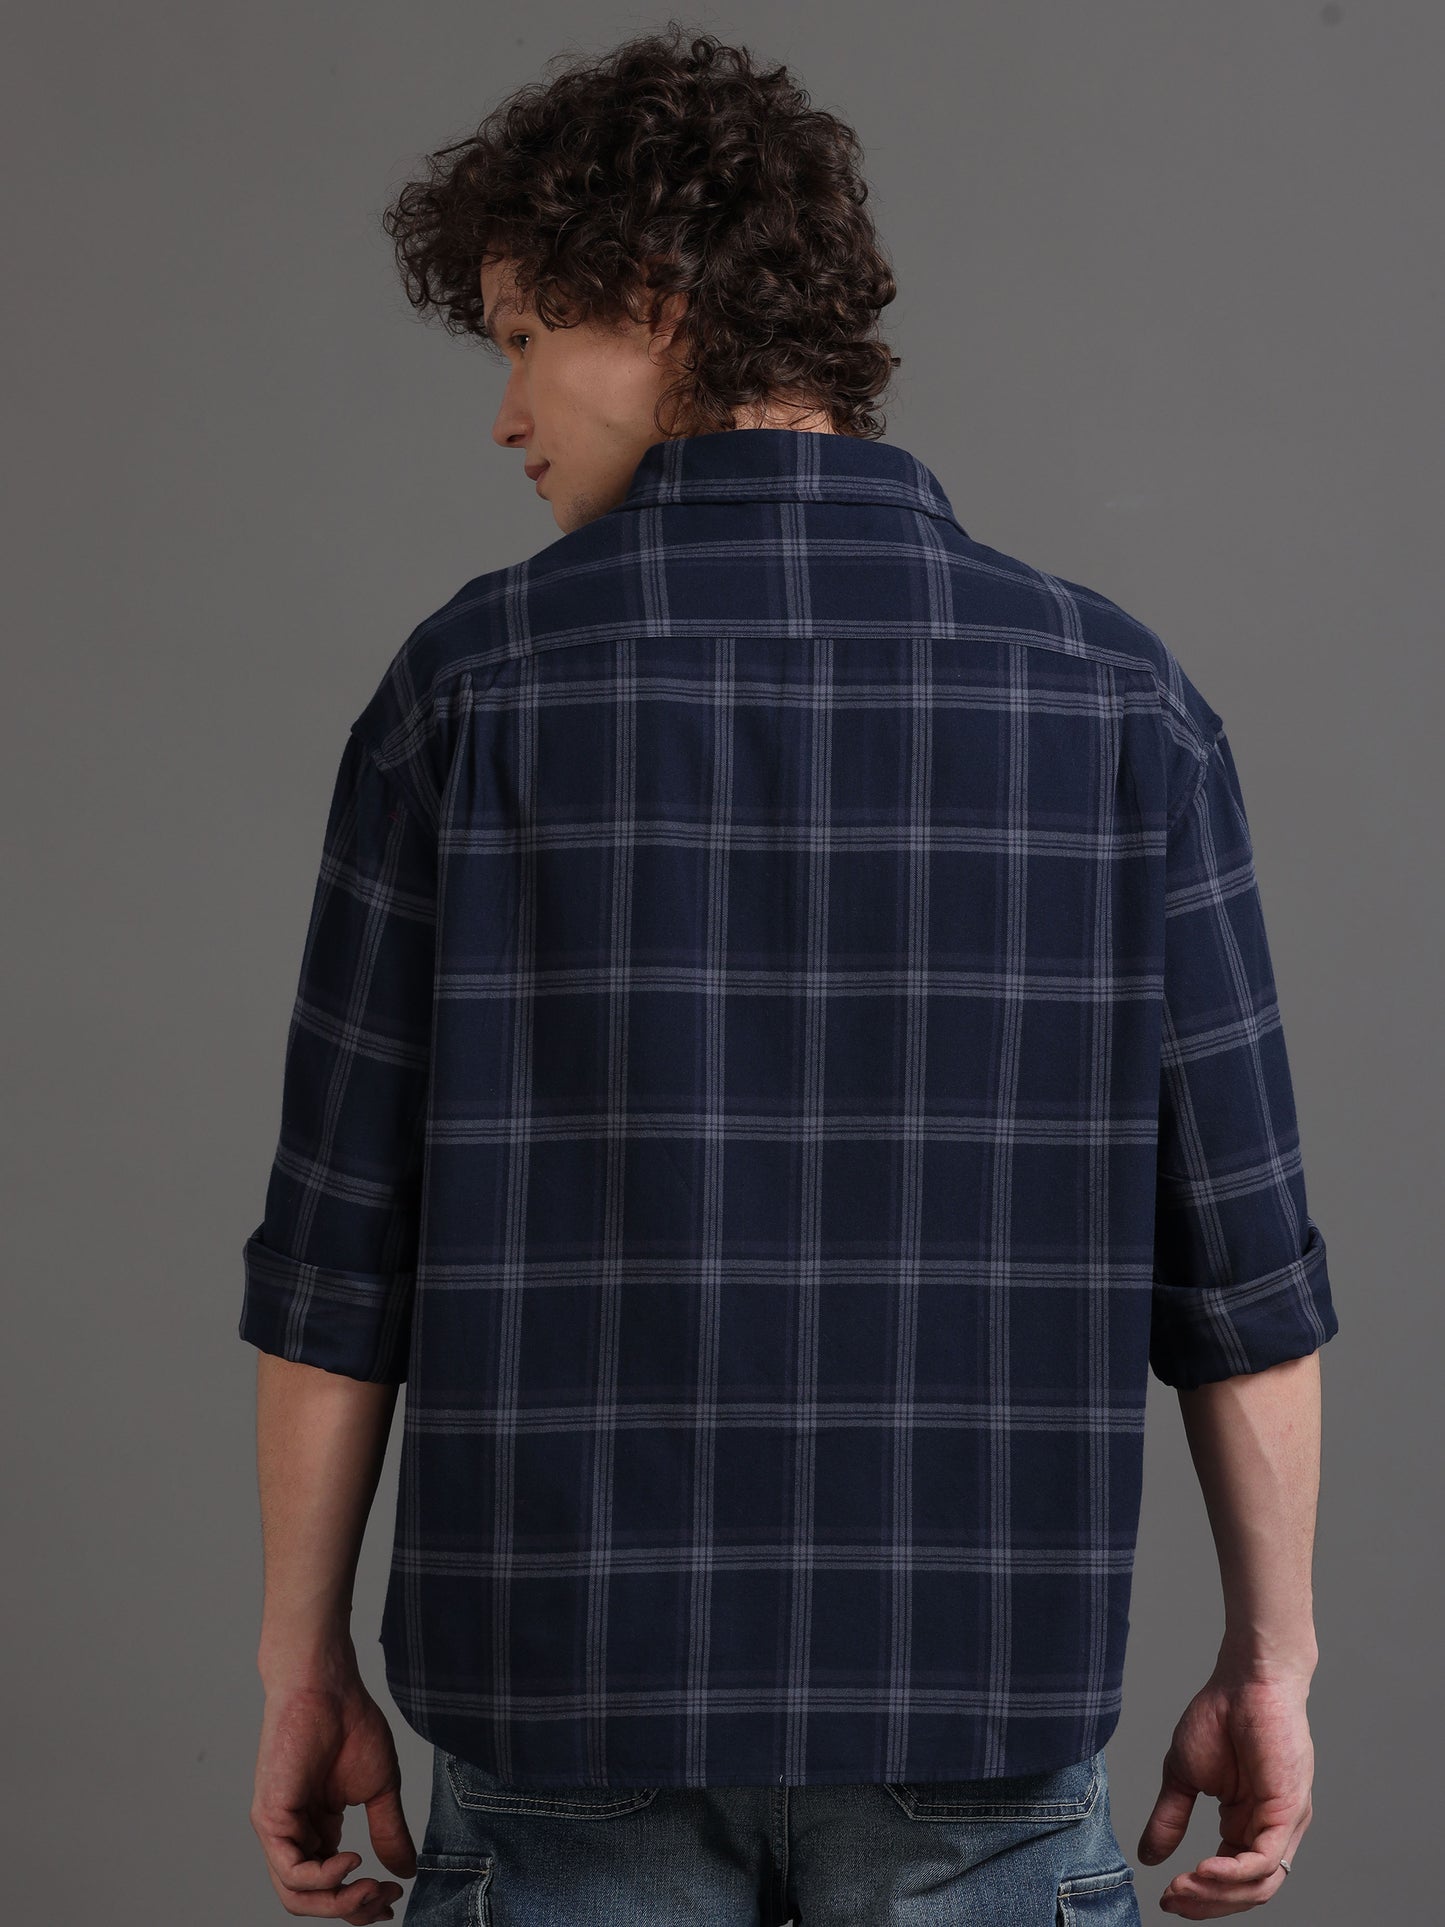 Premium Men Shirt, Relaxed Fit, Yarn Dyed Check, Pure Cotton, Full Sleeve, Navy Blue